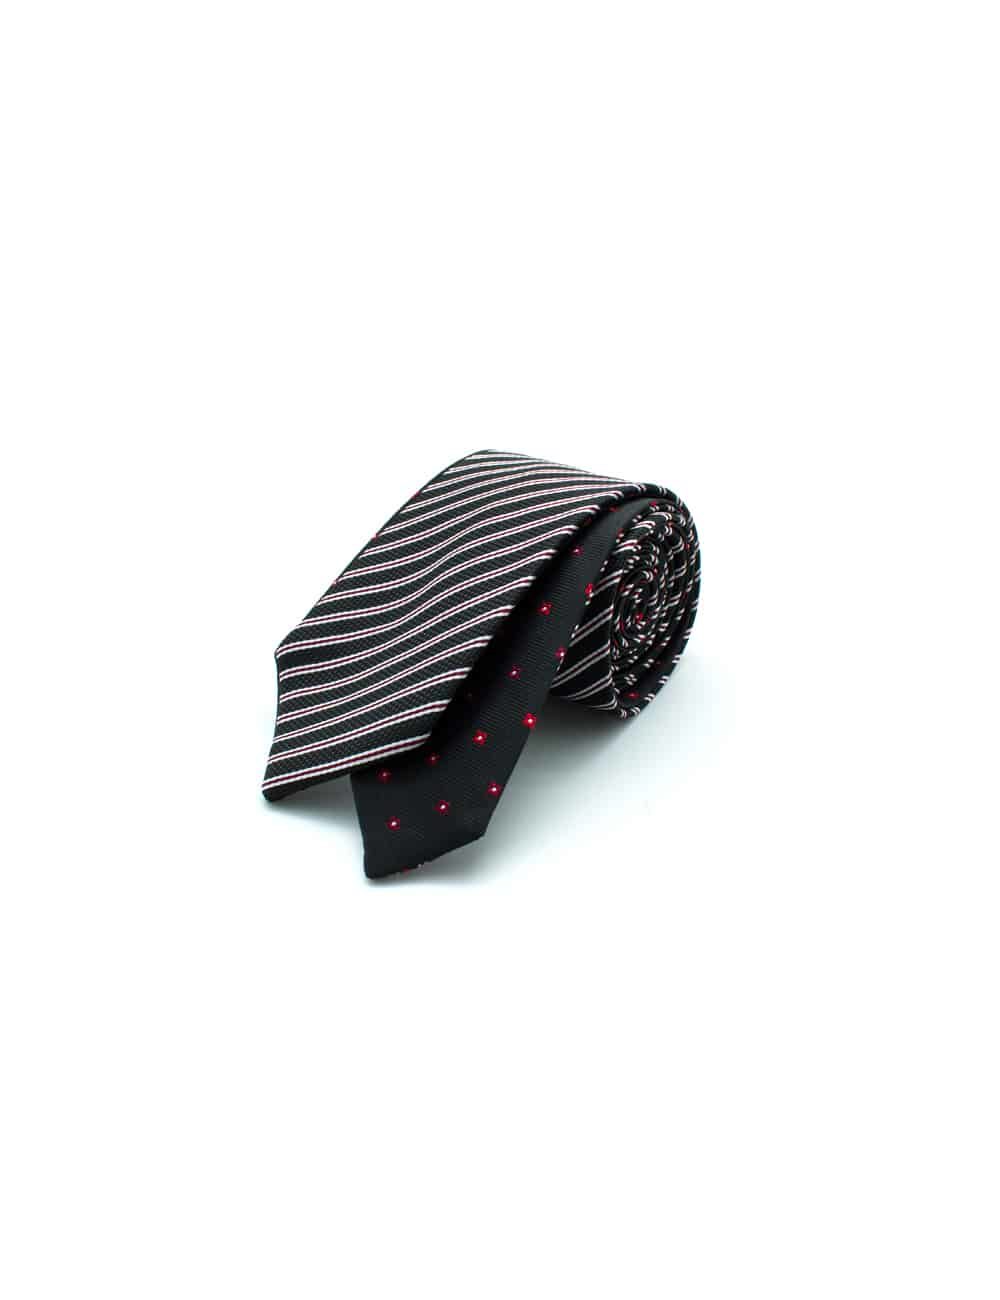 Black Stripes and Red Floral Reversible Woven Necktie RNT9.8